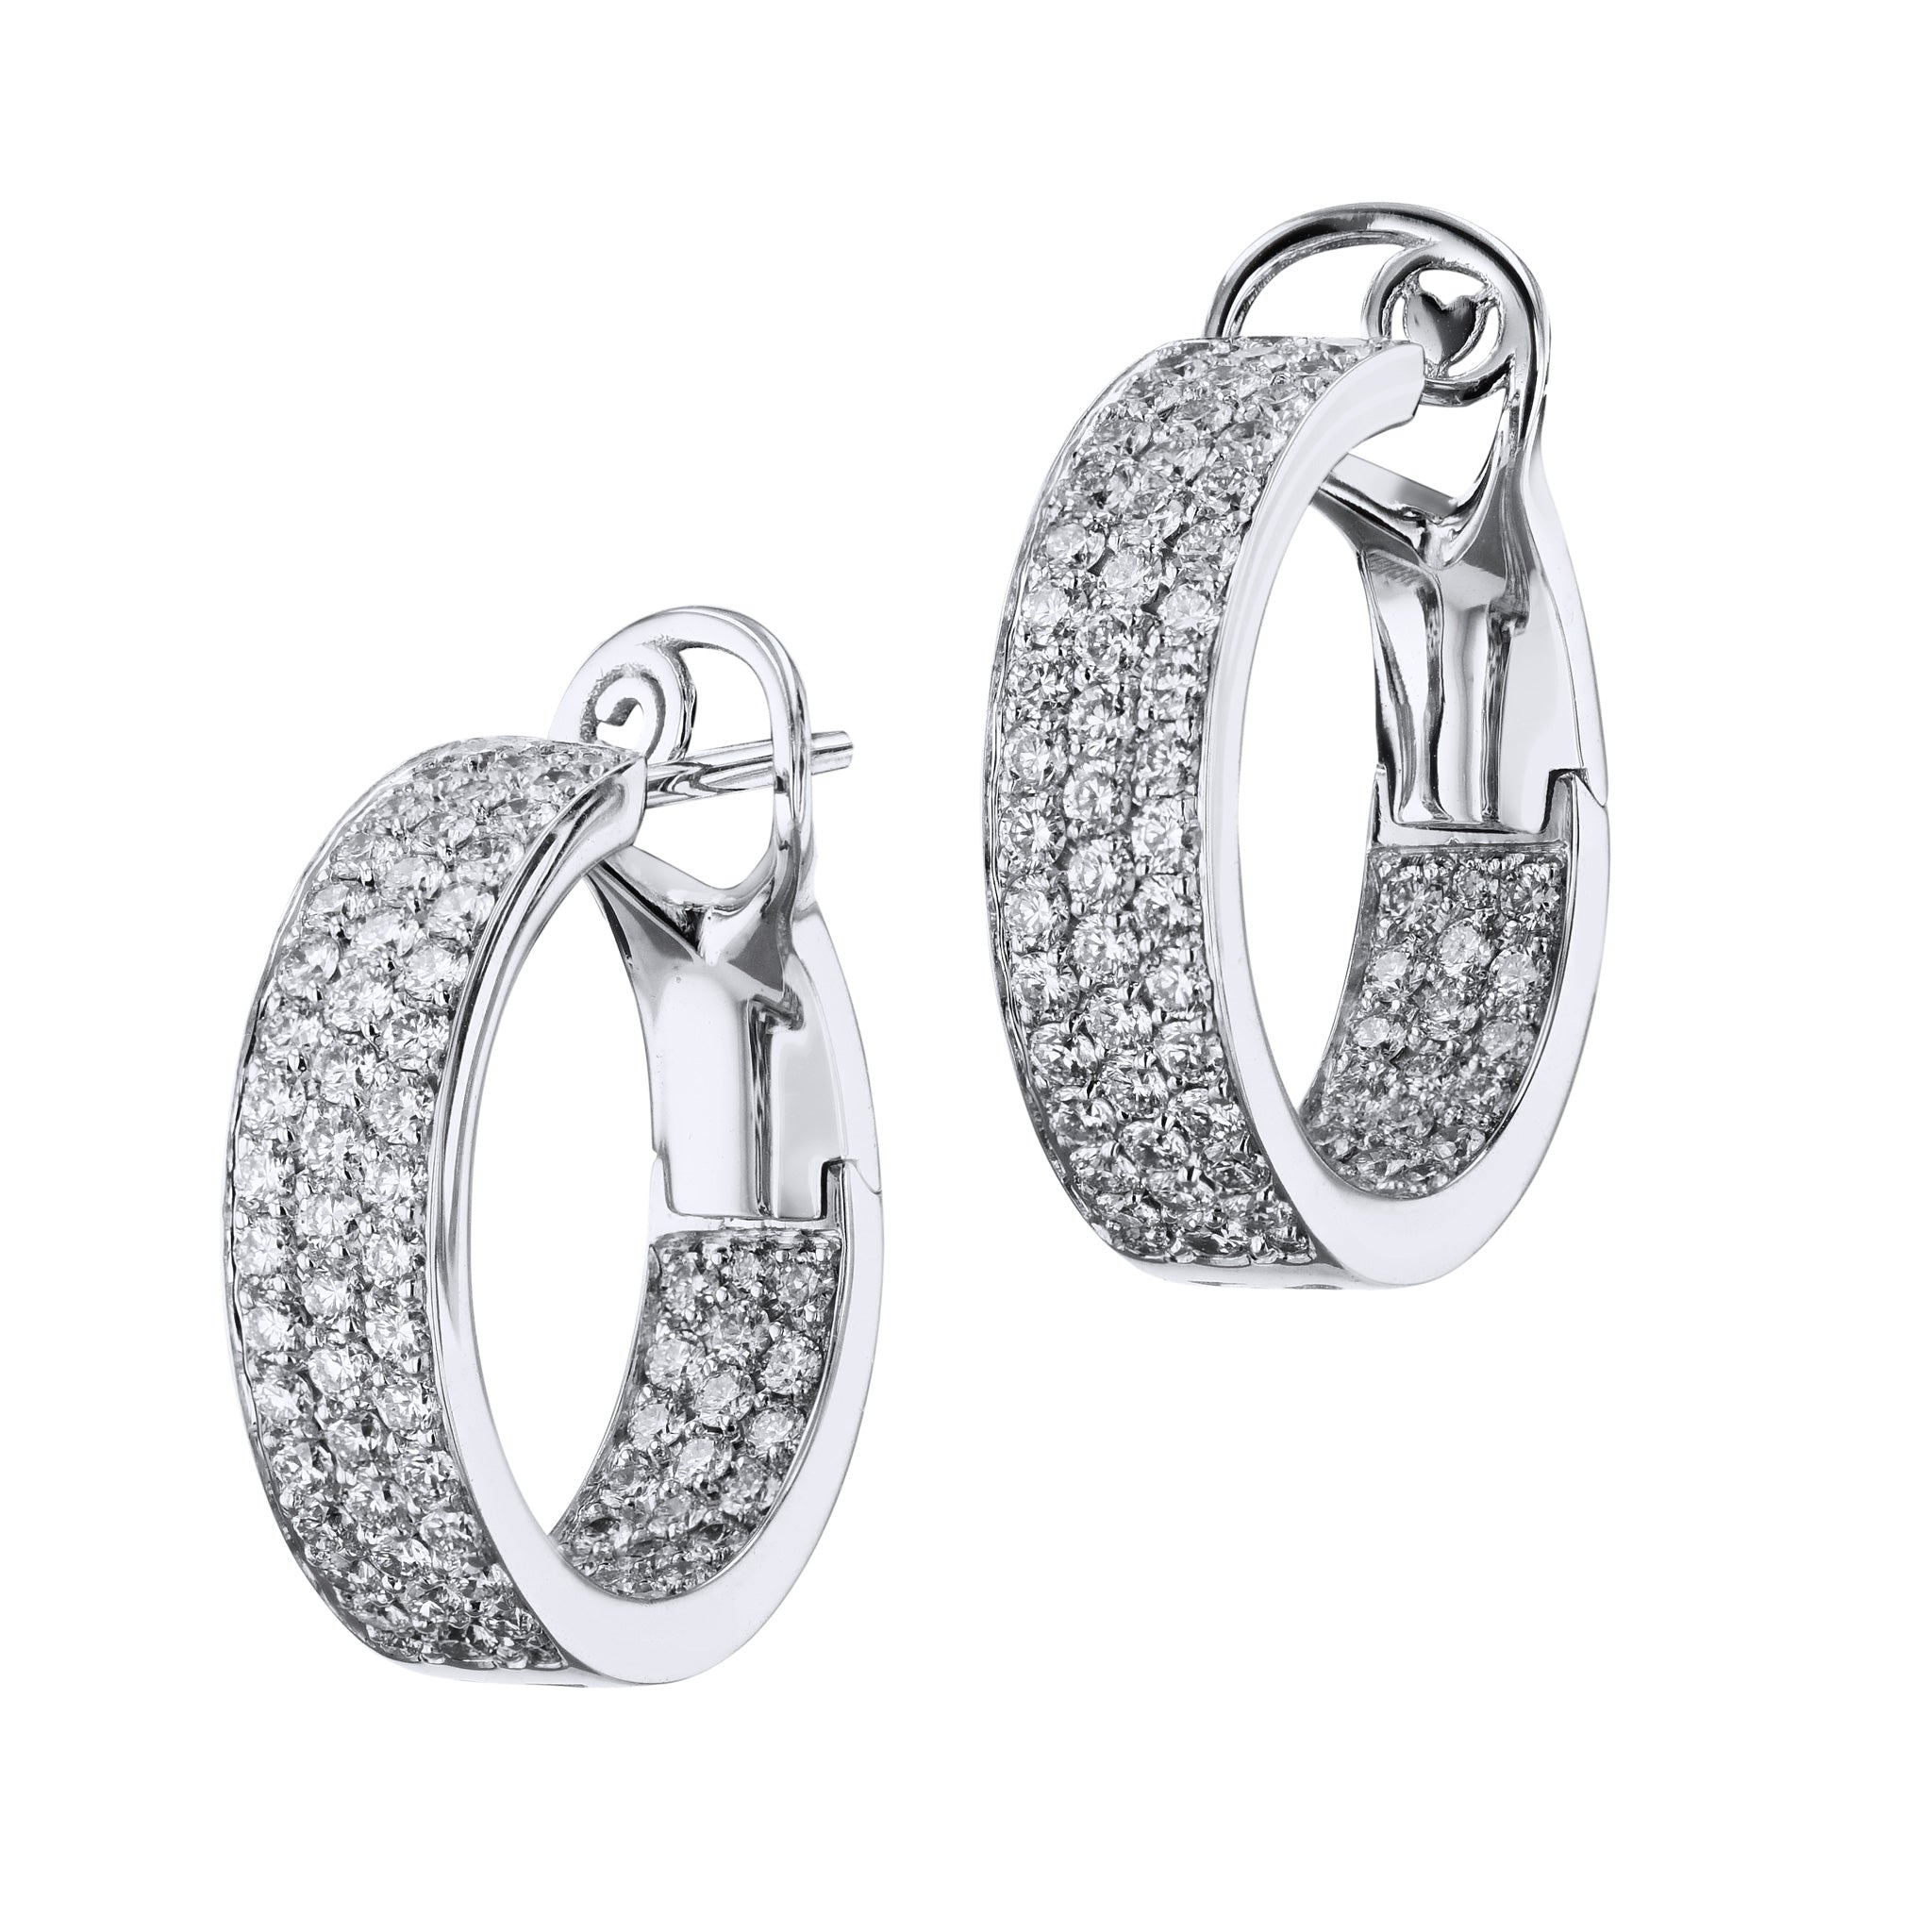 White Gold Diamond Pave Inside-Out Hoop Earrings Earrings Curated by H